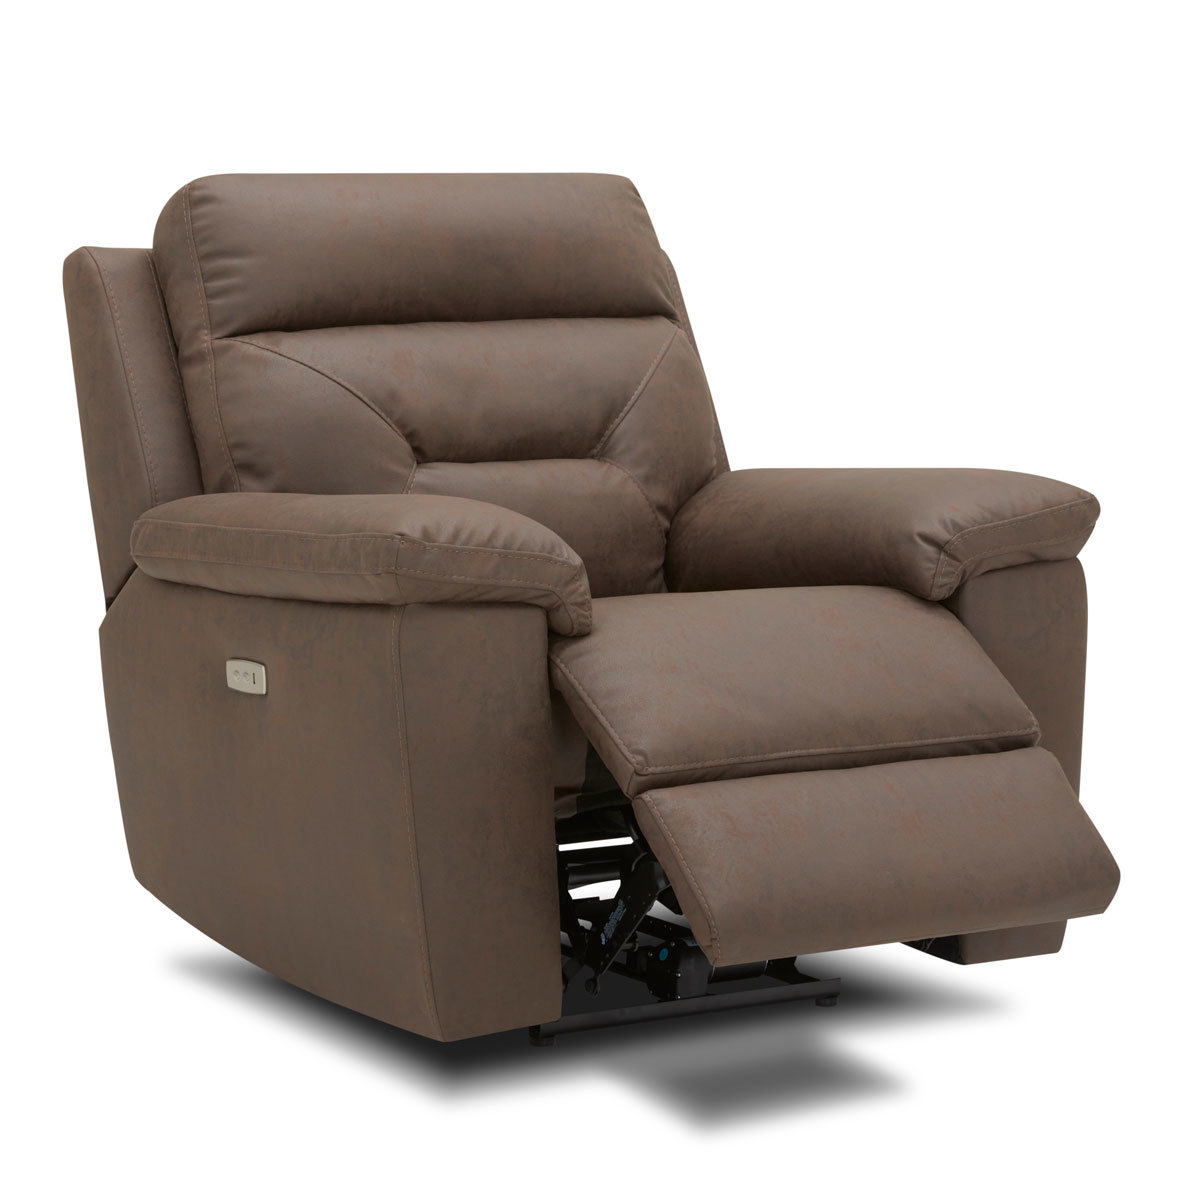 Cut out image of Kuka Brown Fabric Reclining Armchair while reclined